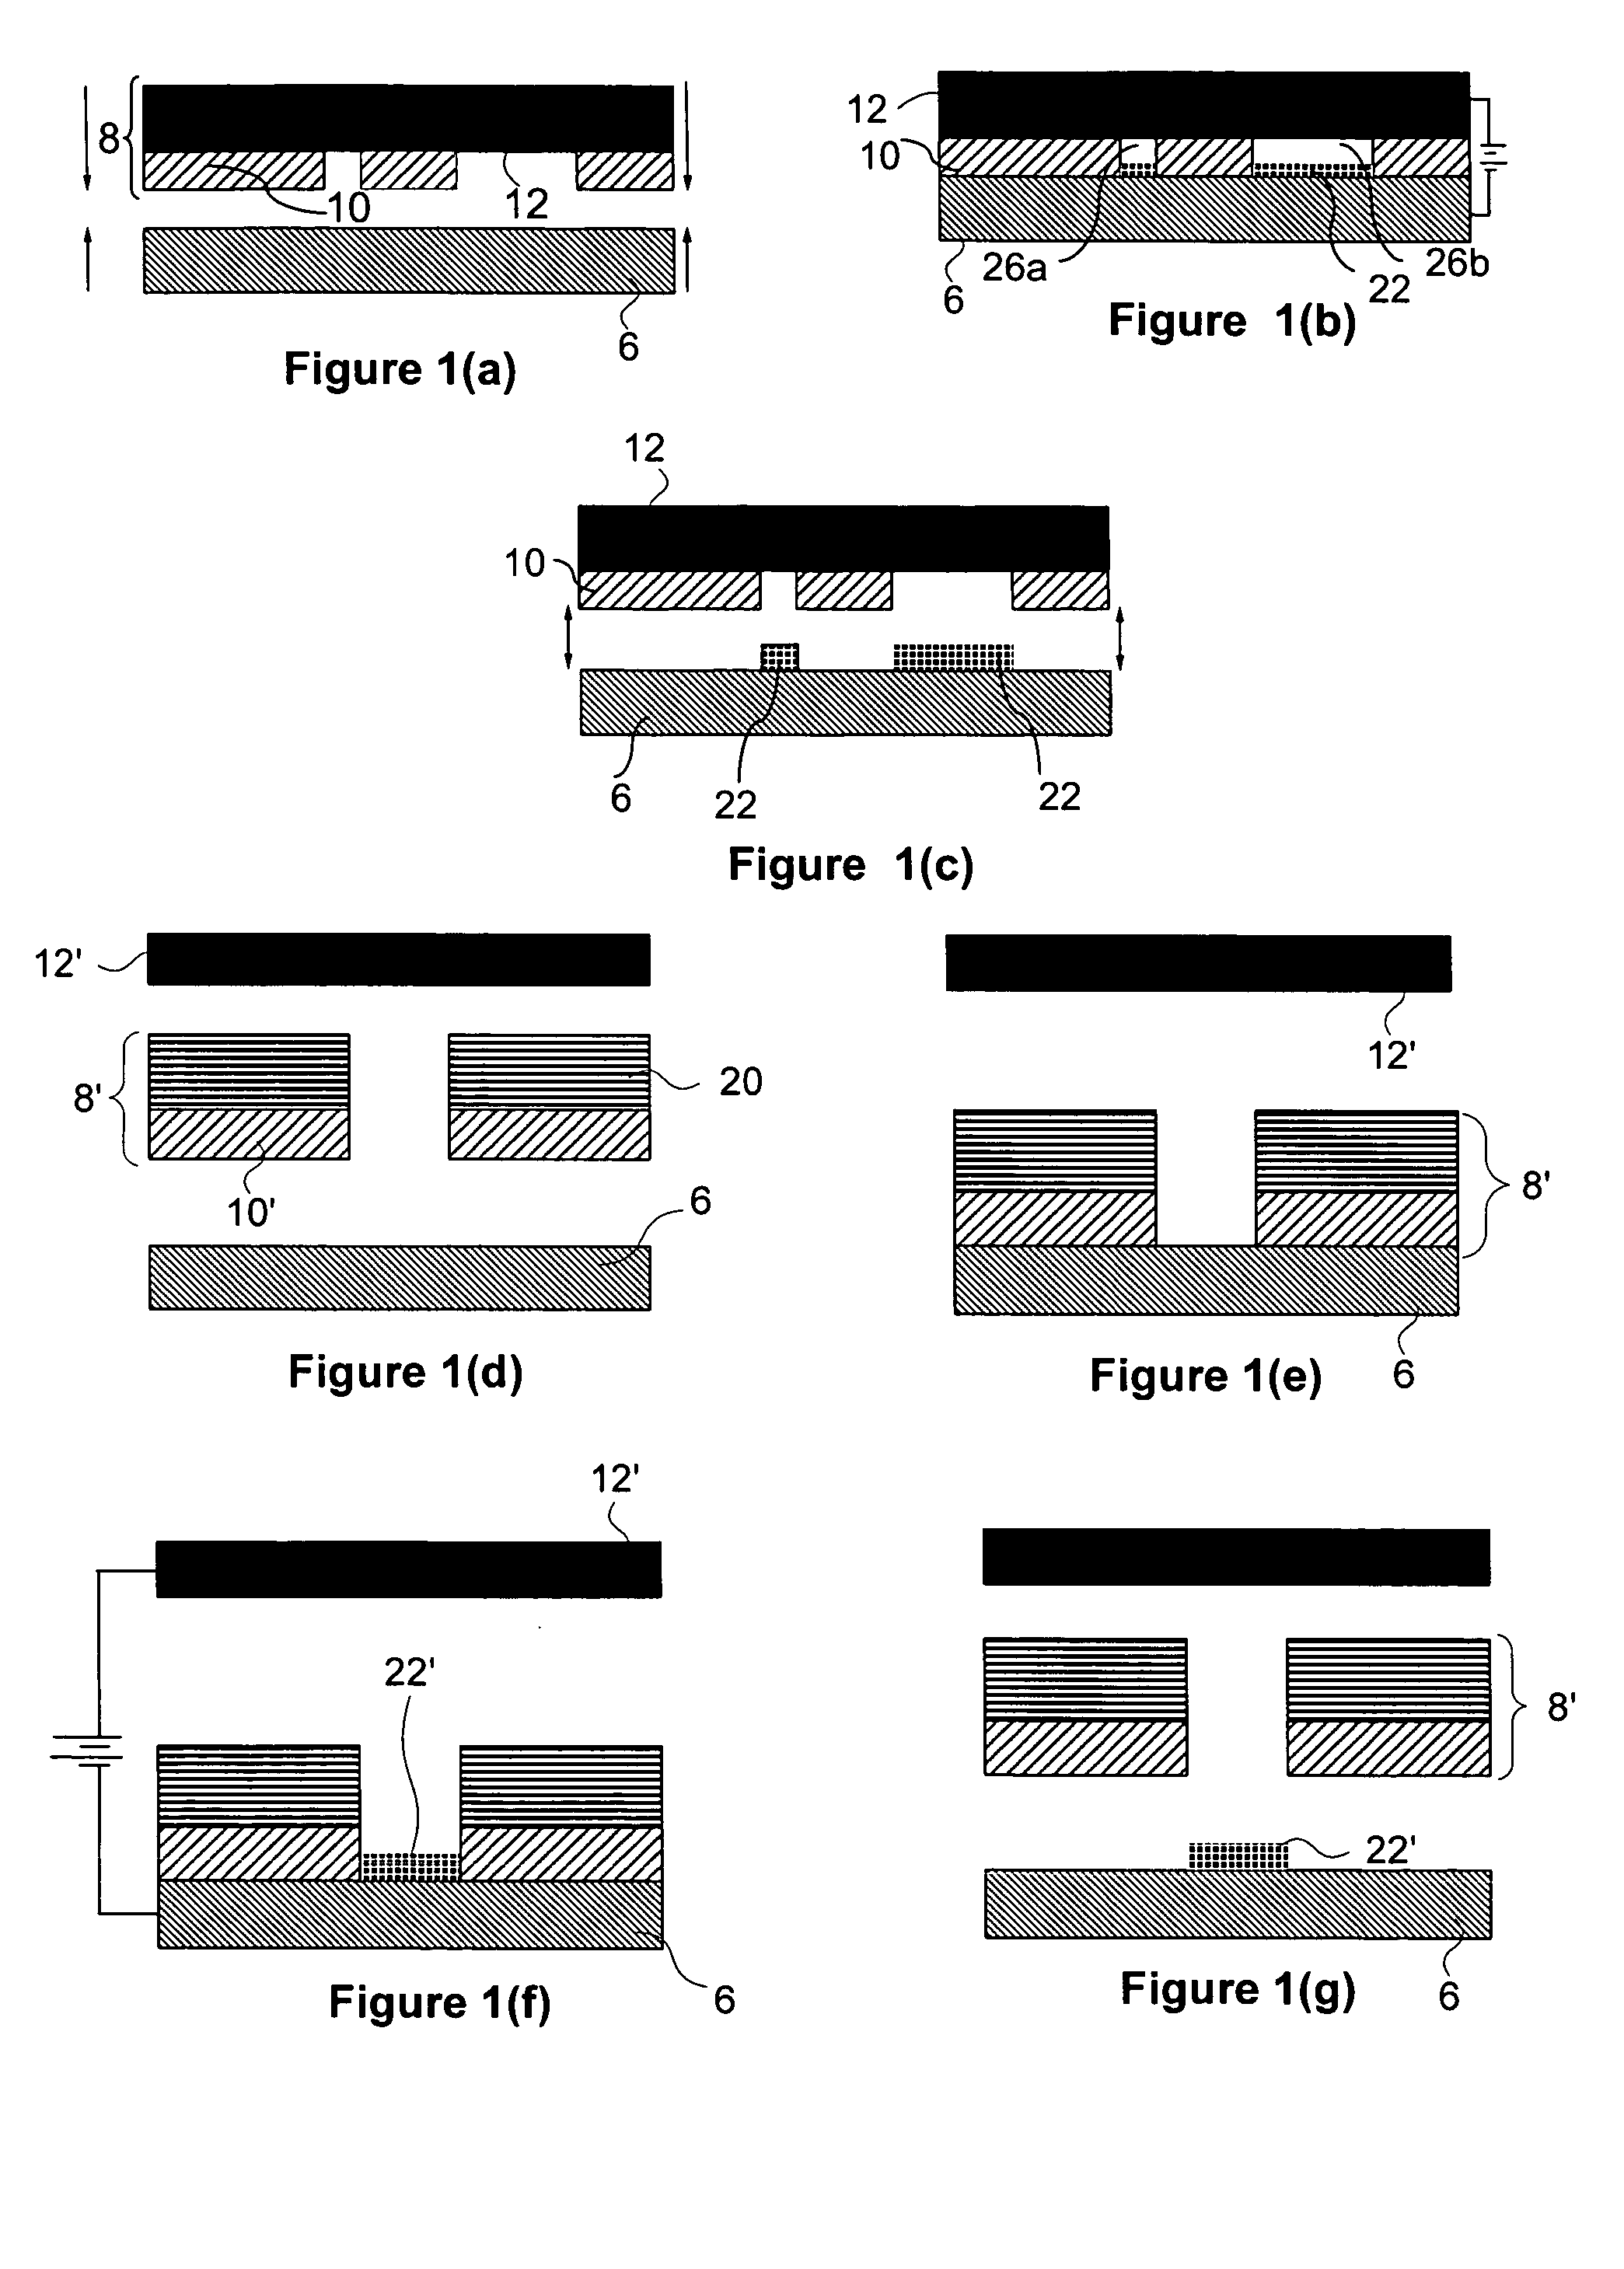 Electrochemical fabrication methods with enhanced post deposition processing